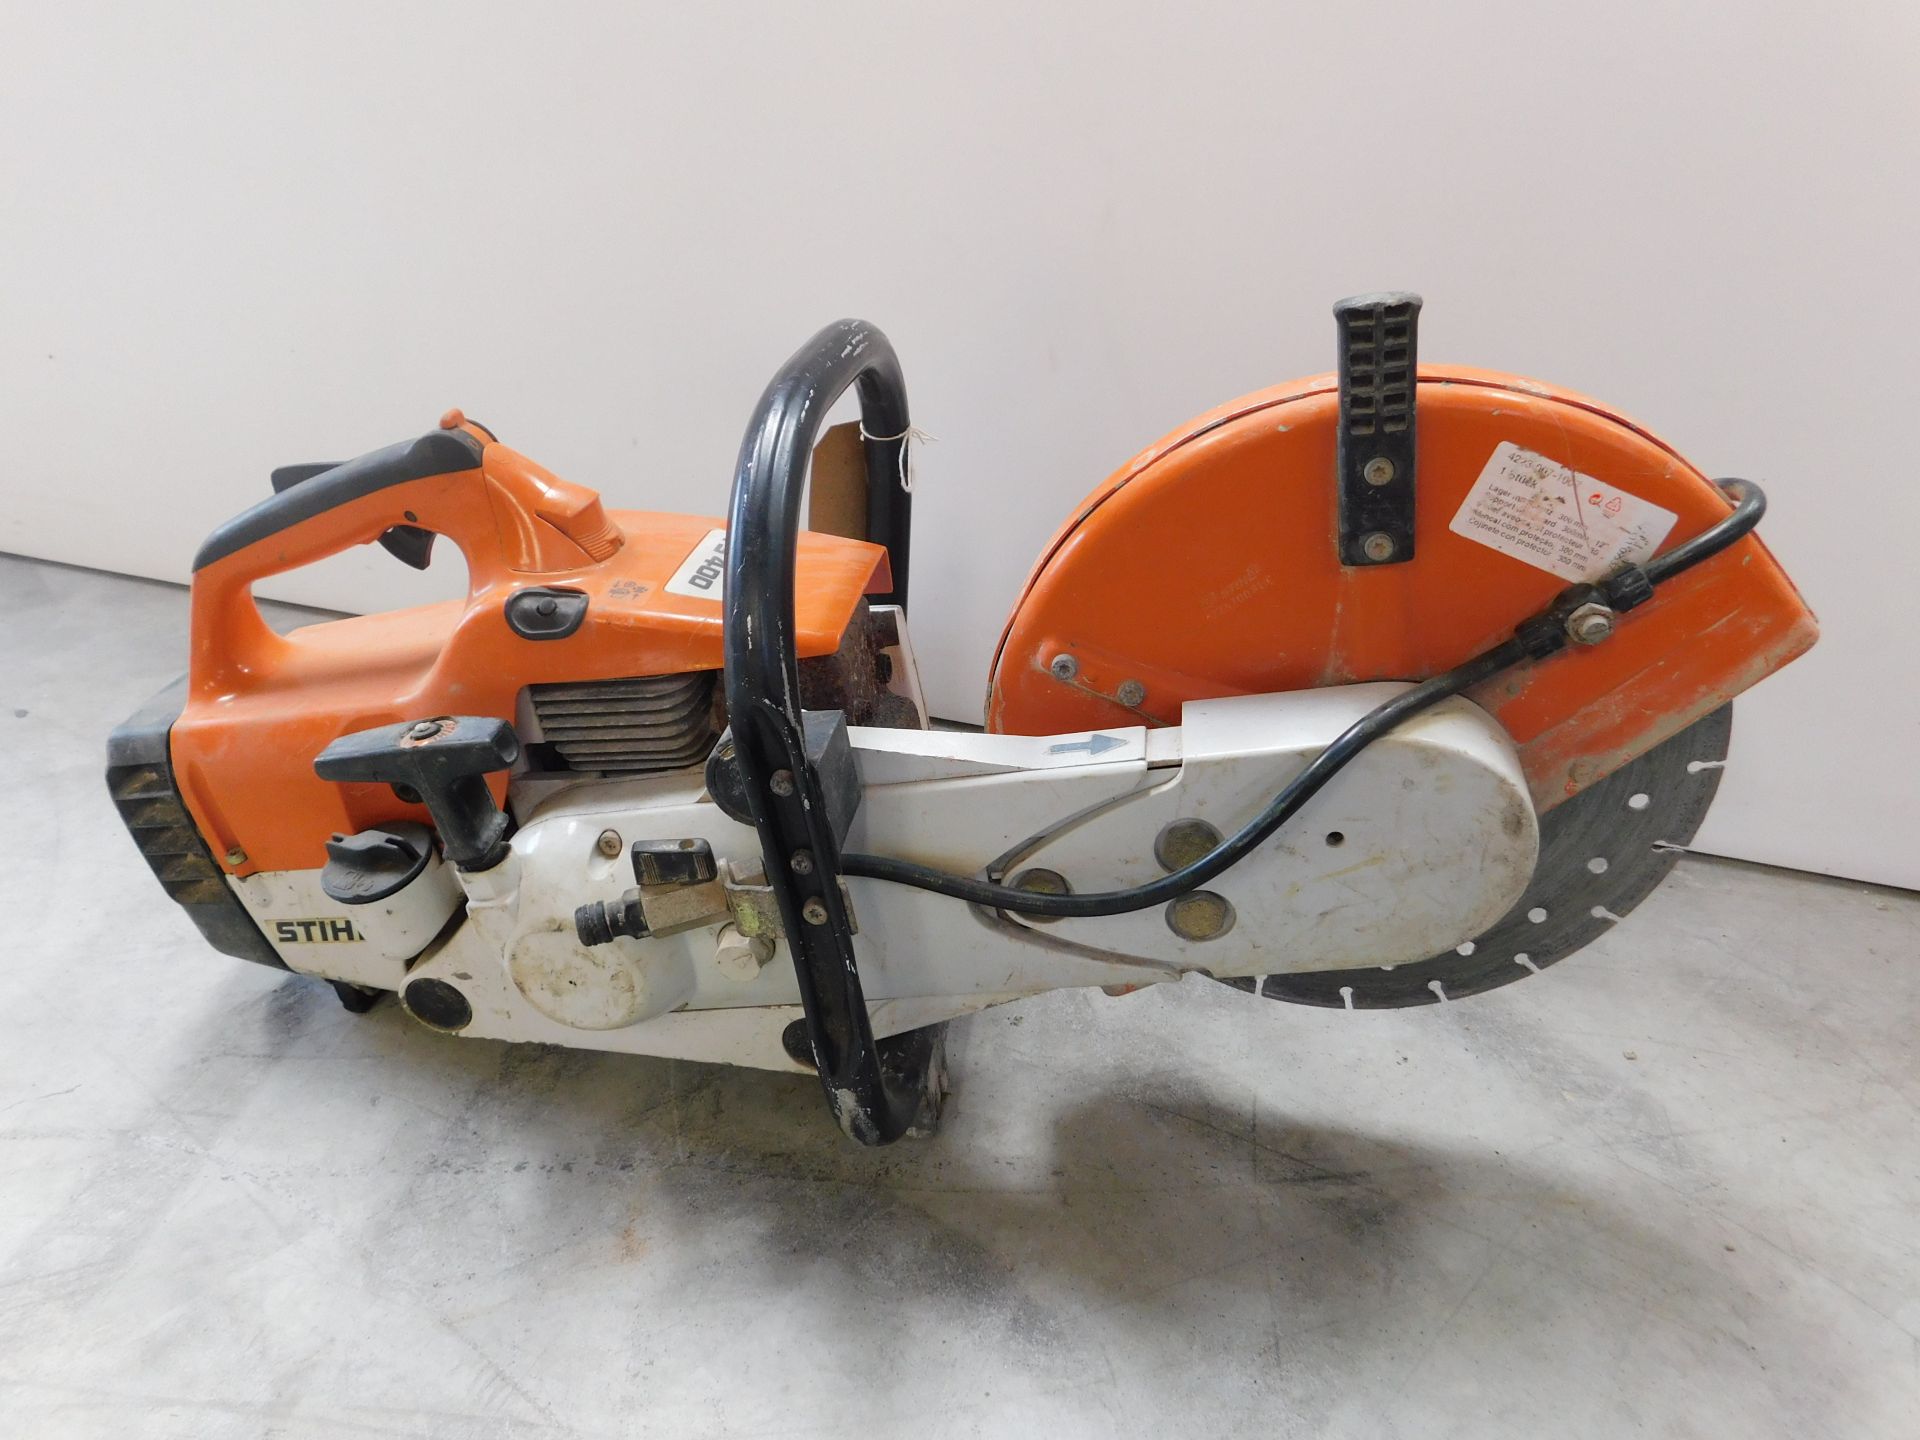 Stihl T5400 Petrol Cutter (Location: Brentwood. Please Refer to General Notes) - Image 4 of 4